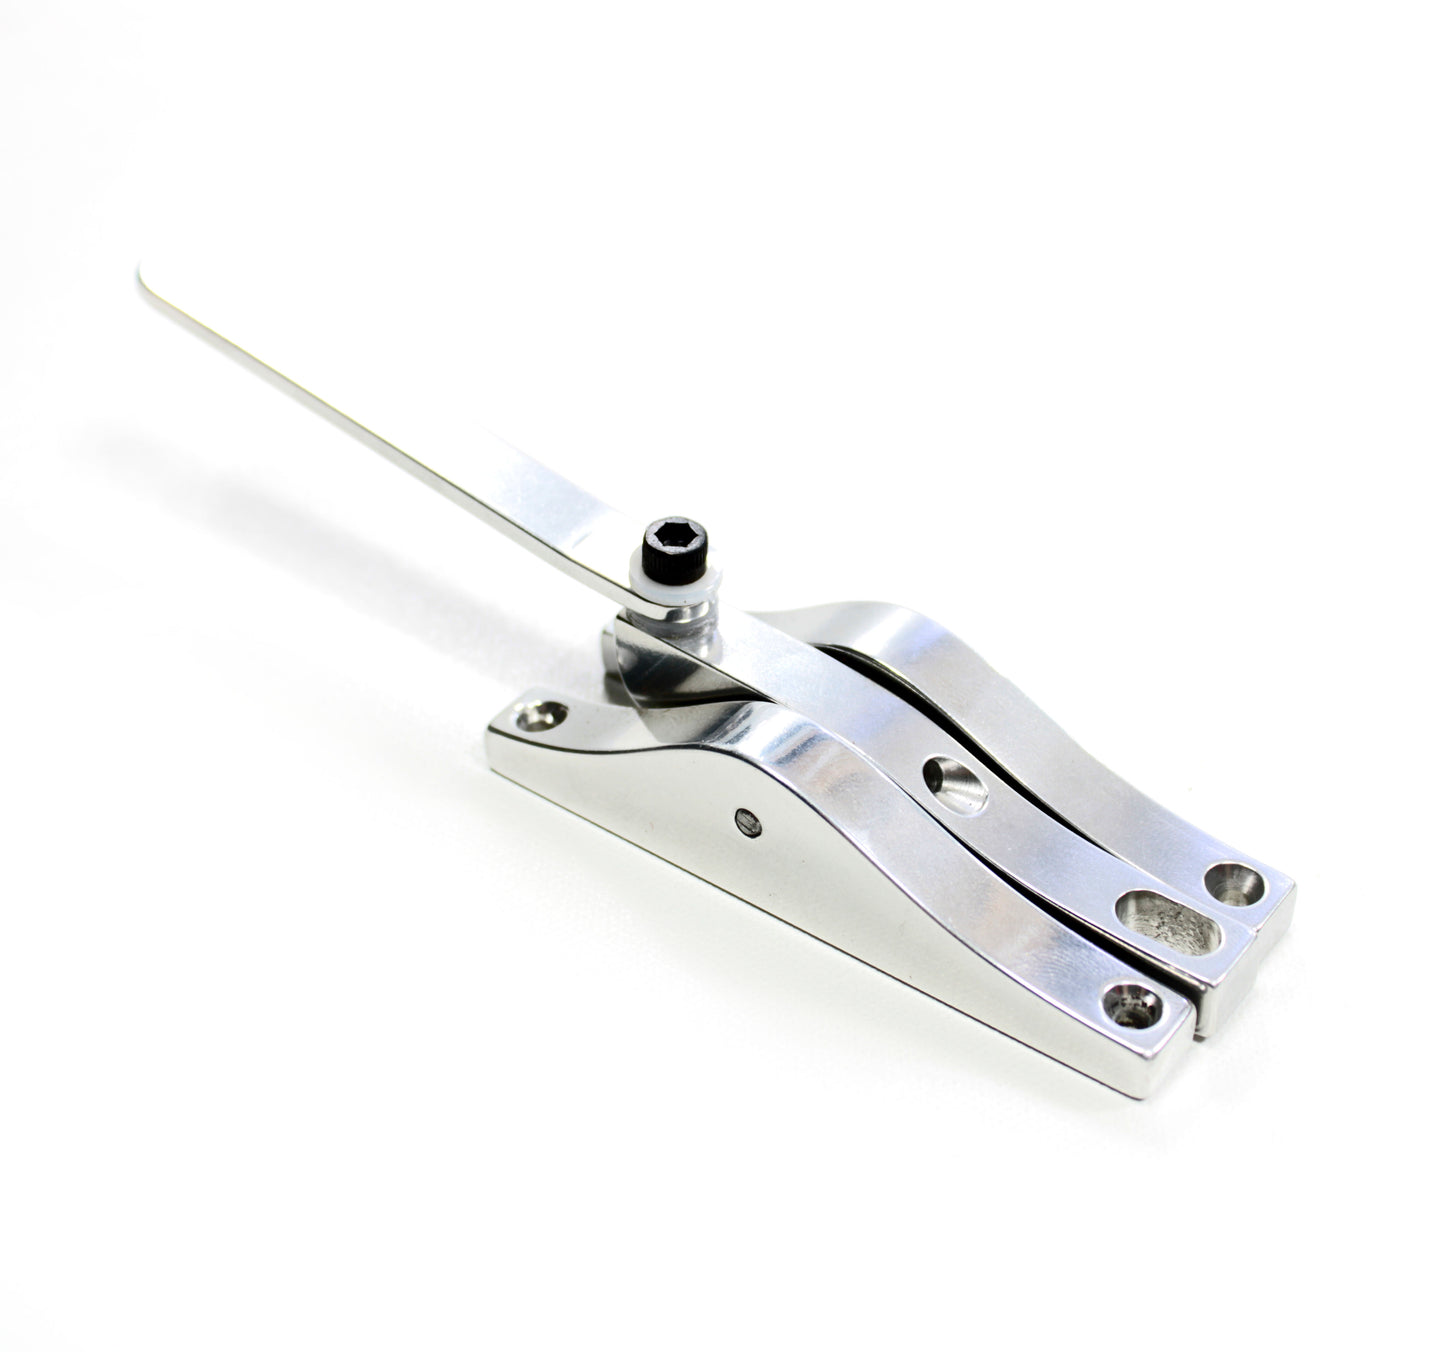 Peters Pitch Witch single string B bender palm lever, tele (Compare to Certano)